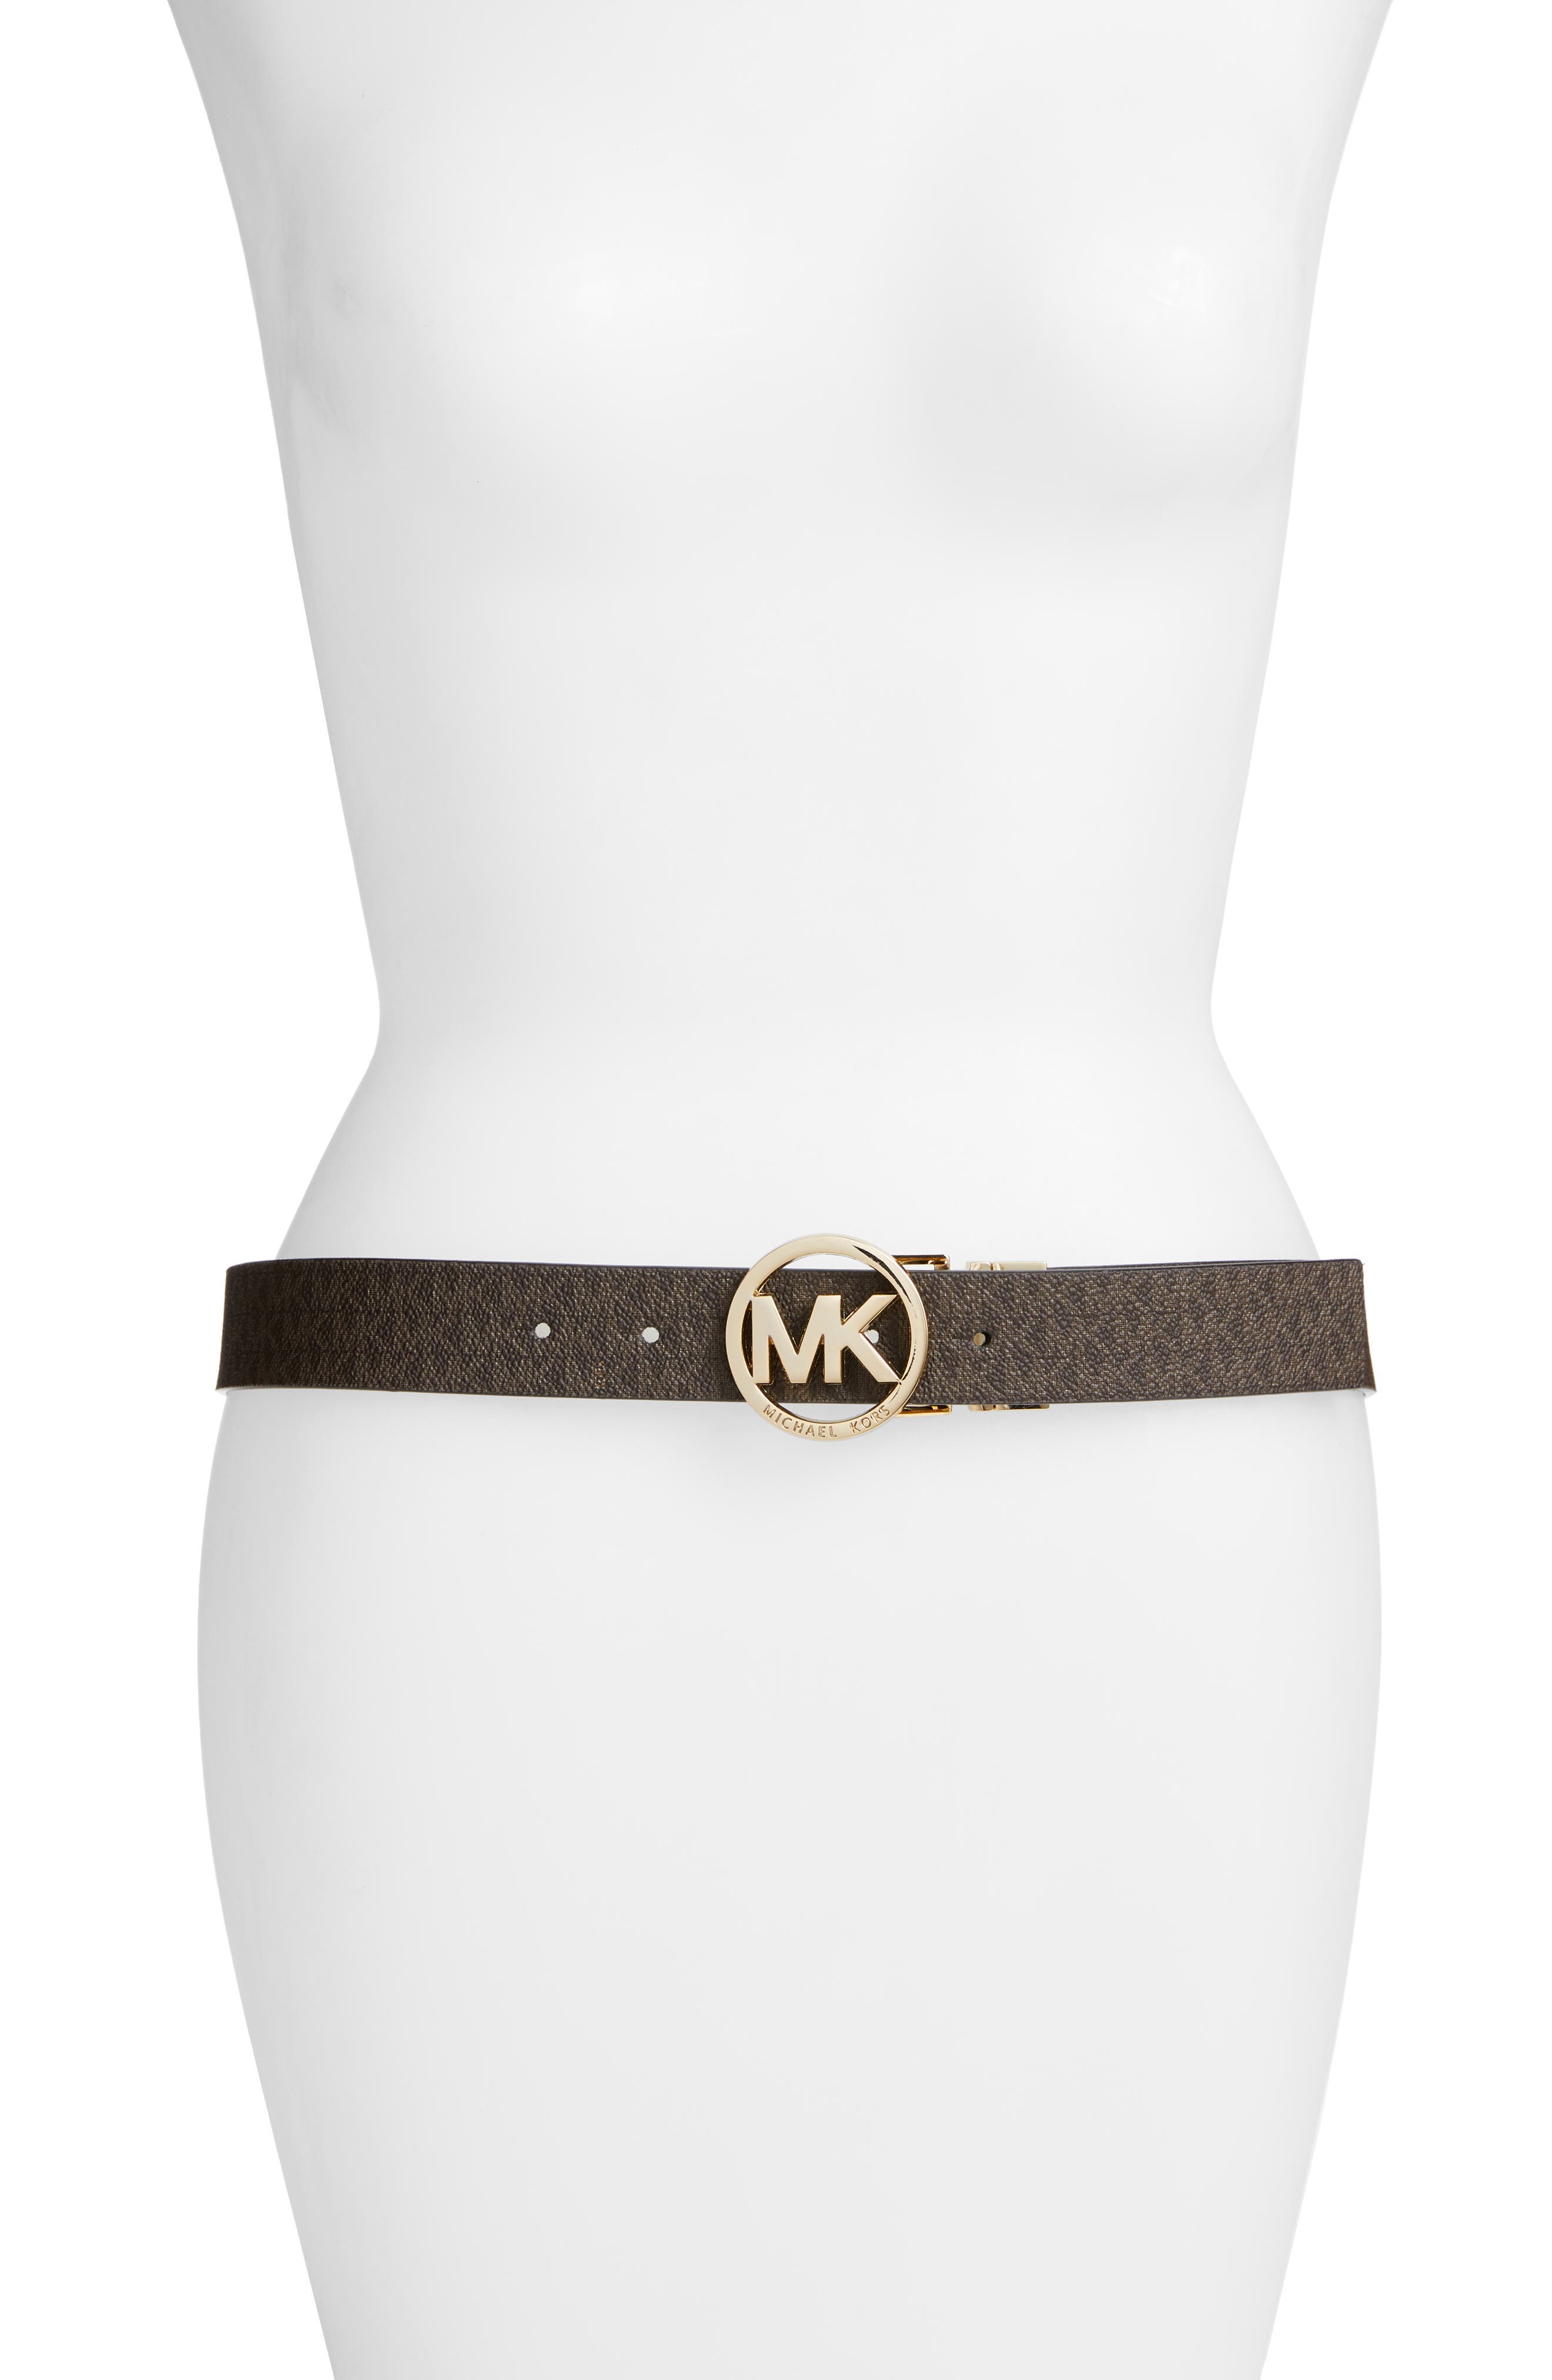 where are michael kors belts made